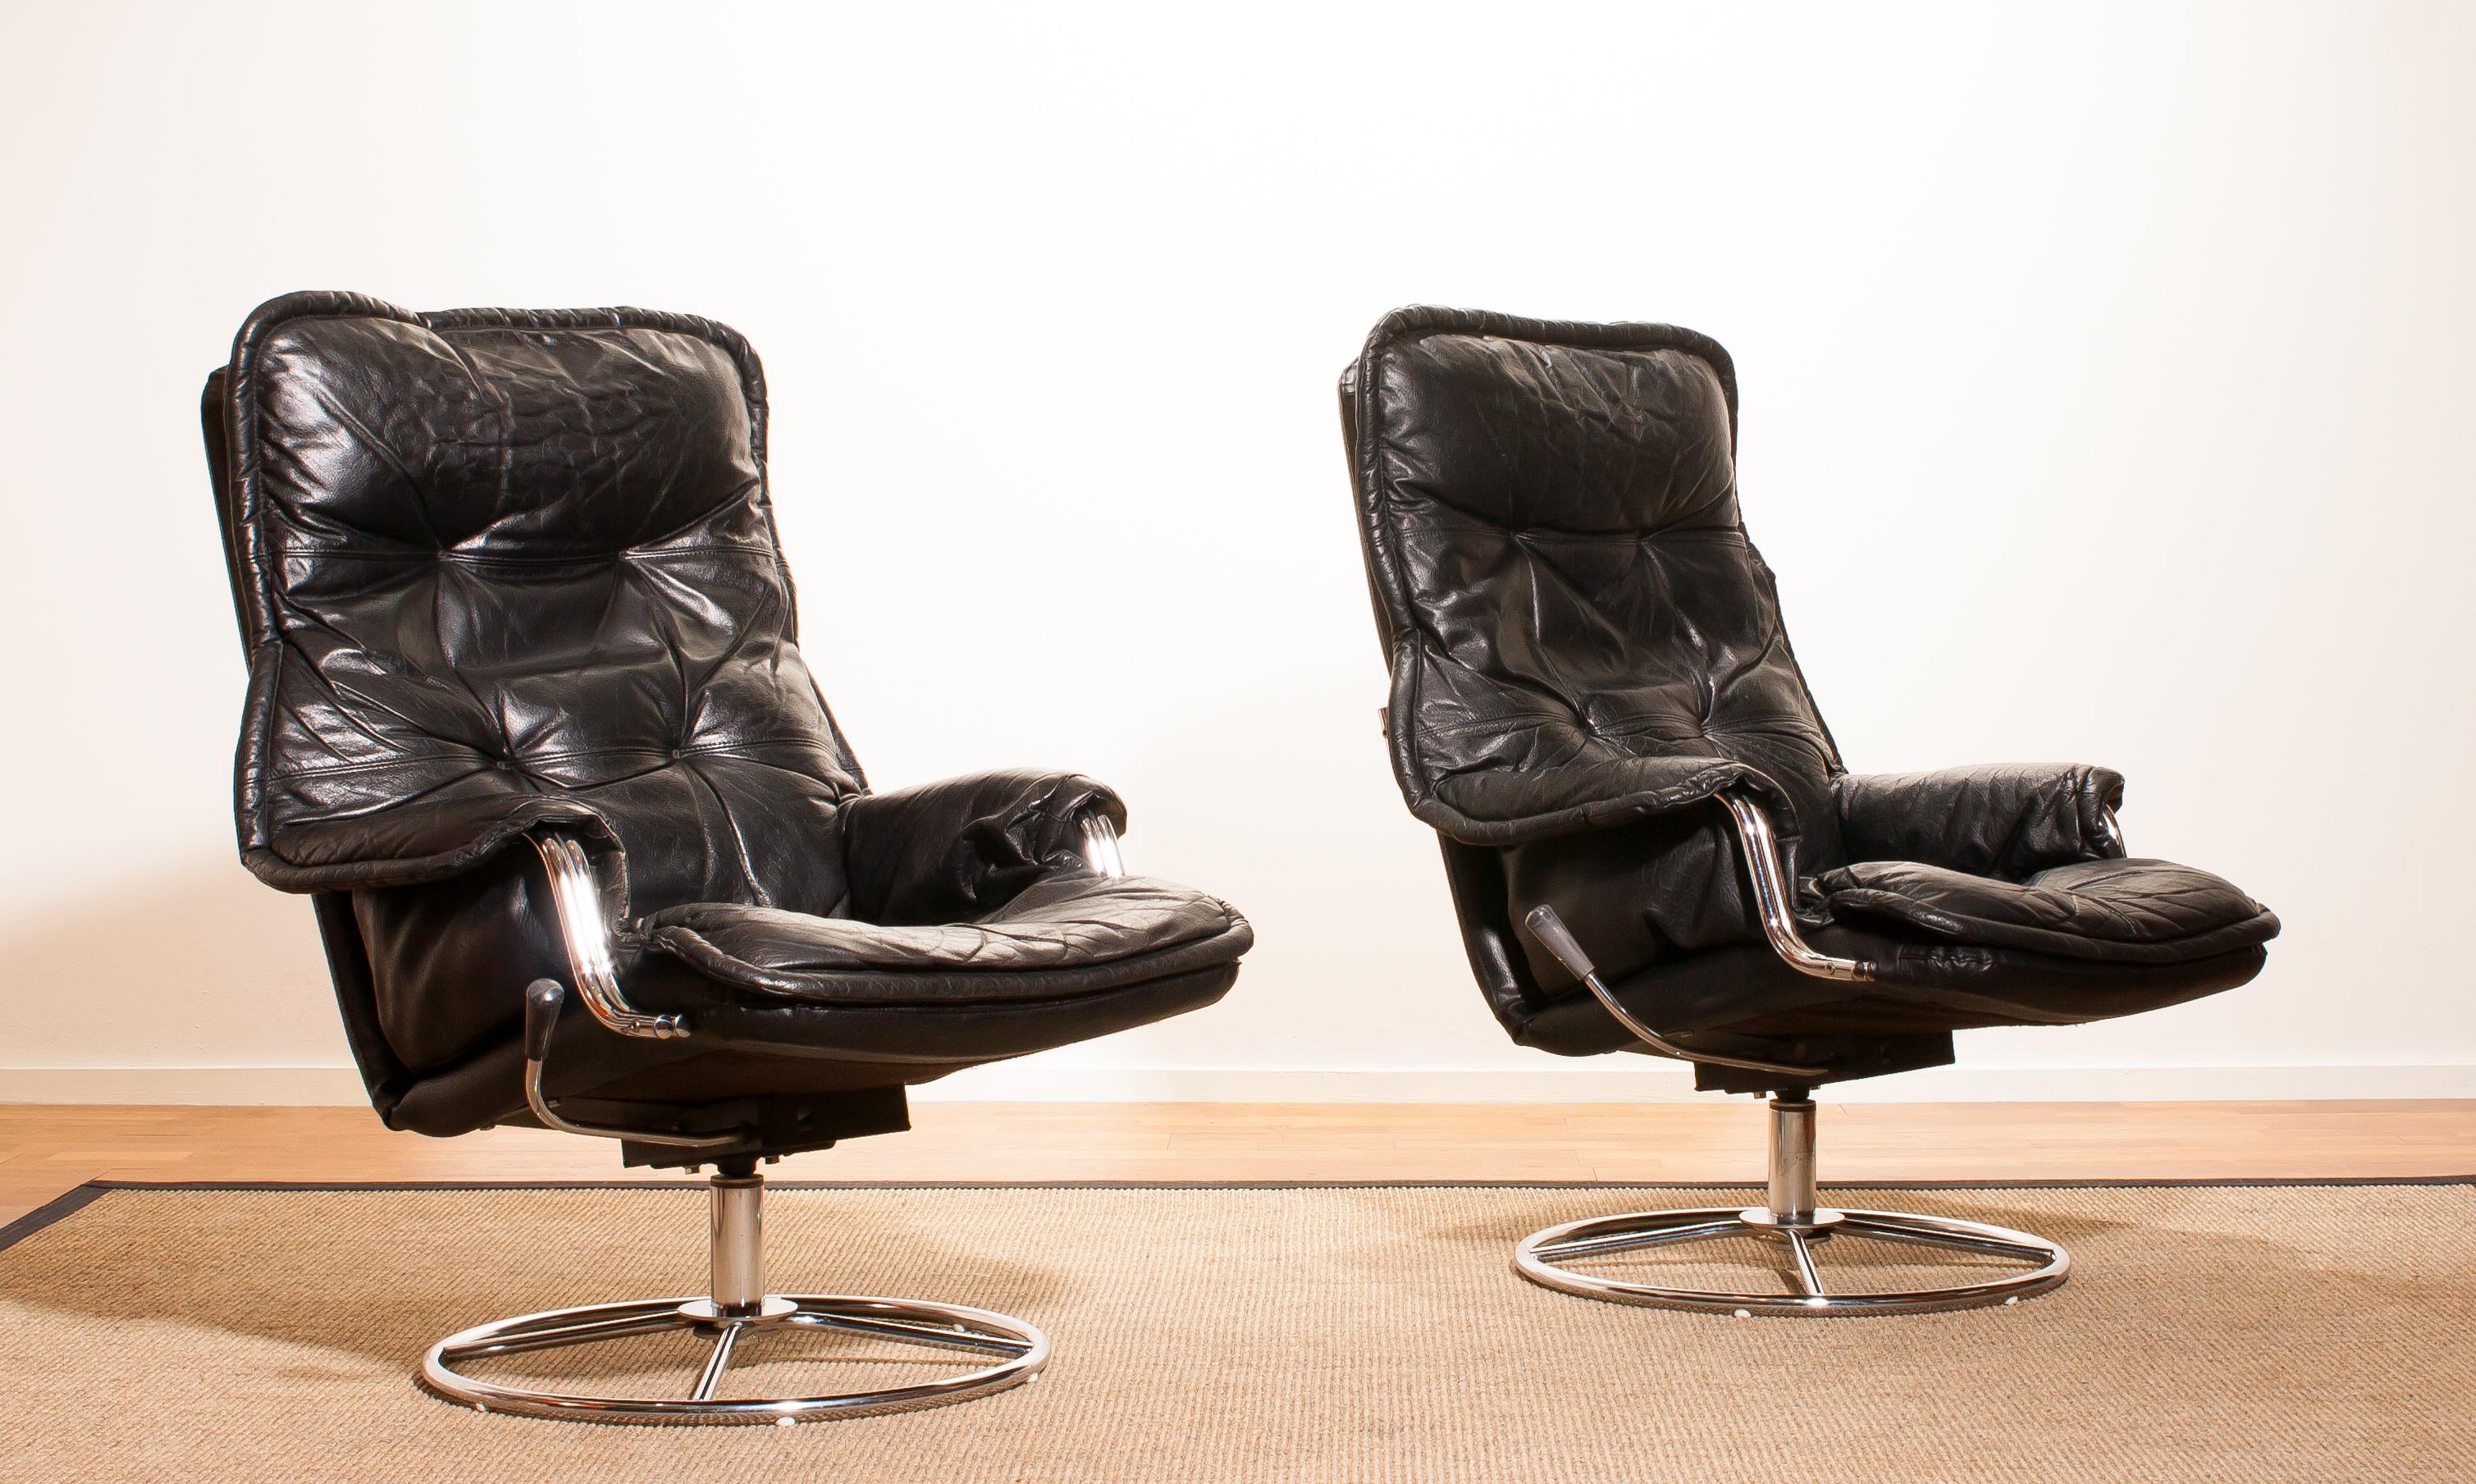 Beautiful lounge chairs made in Sweden.
These very nice design chairs have a black leather seating and armrests on a swivel chrome steel frame.
They are in wonderful condition.
Period 1970s
Dimensions: H 94 cm, W 68 cm, D 72 cm, SH 40.